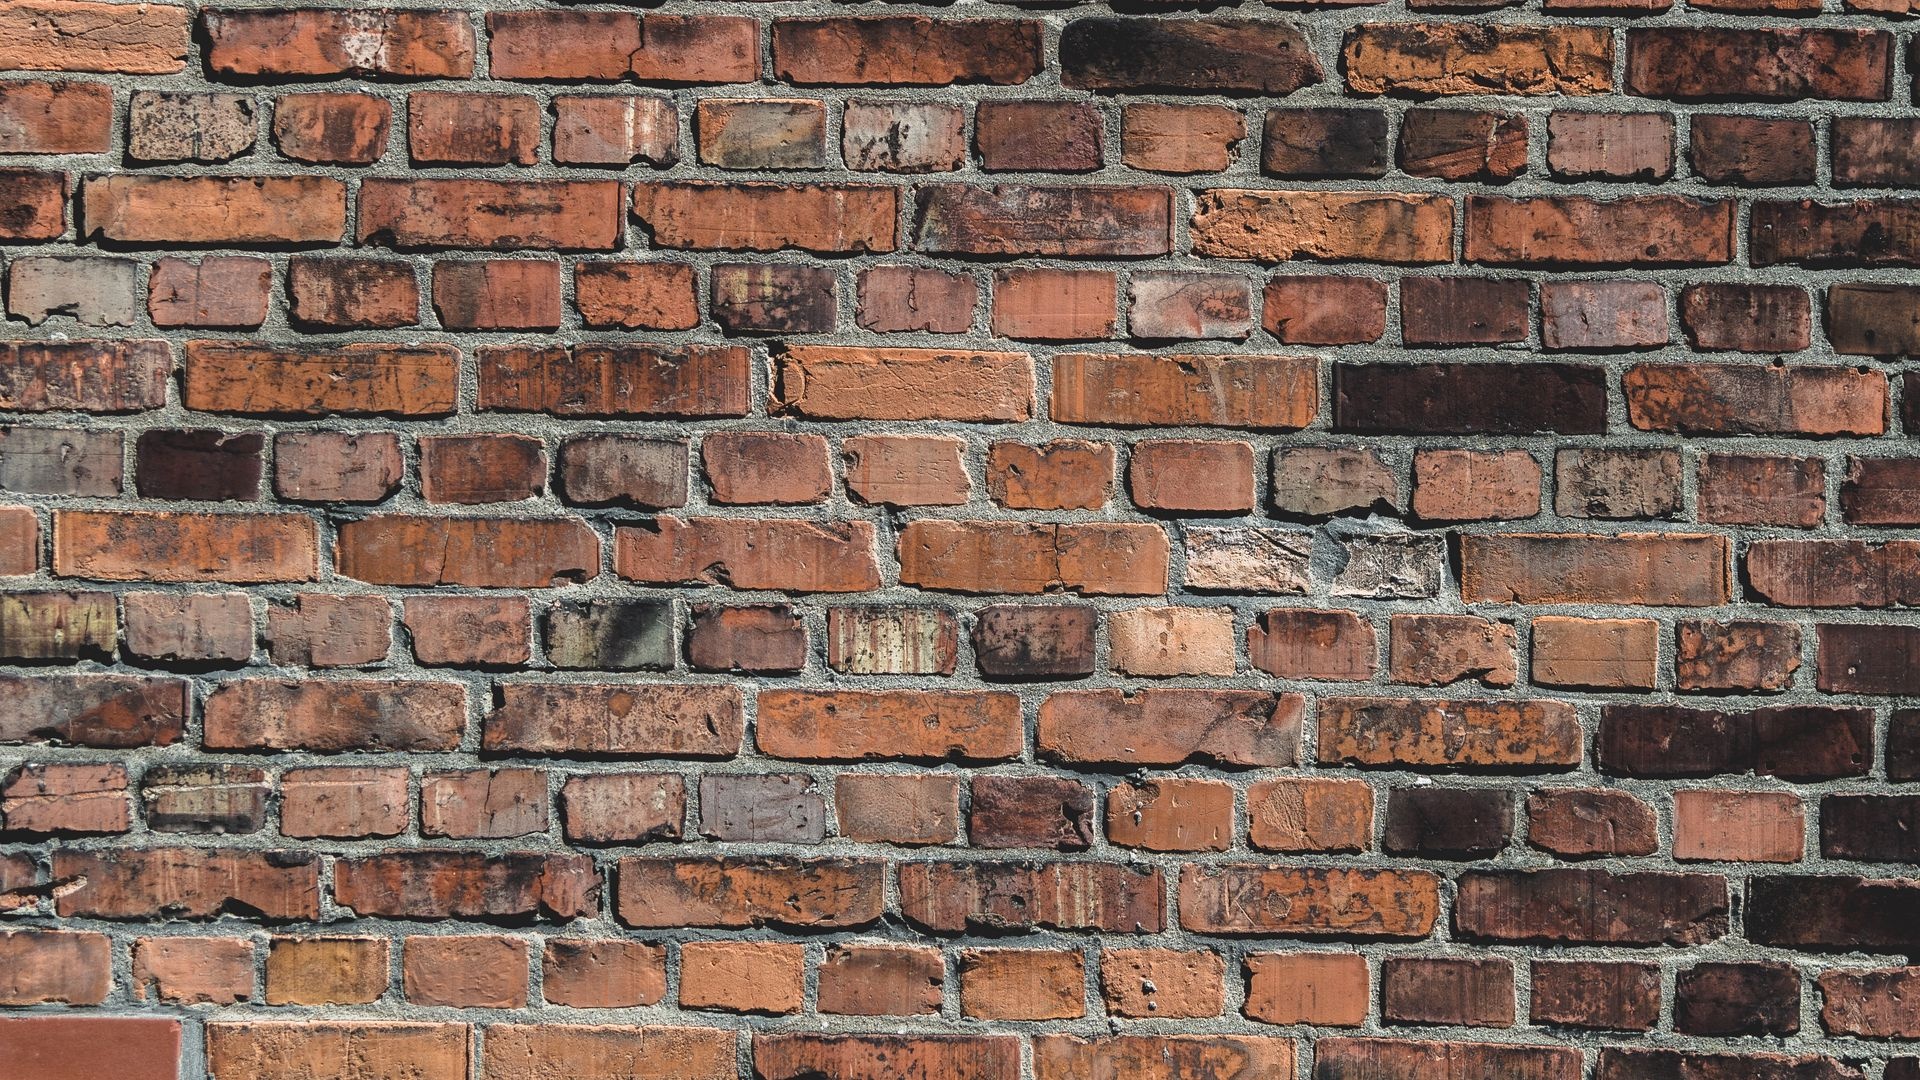 Brick walls, HD wallpapers, Desktop download, Authentic and gritty, 1920x1080 Full HD Desktop